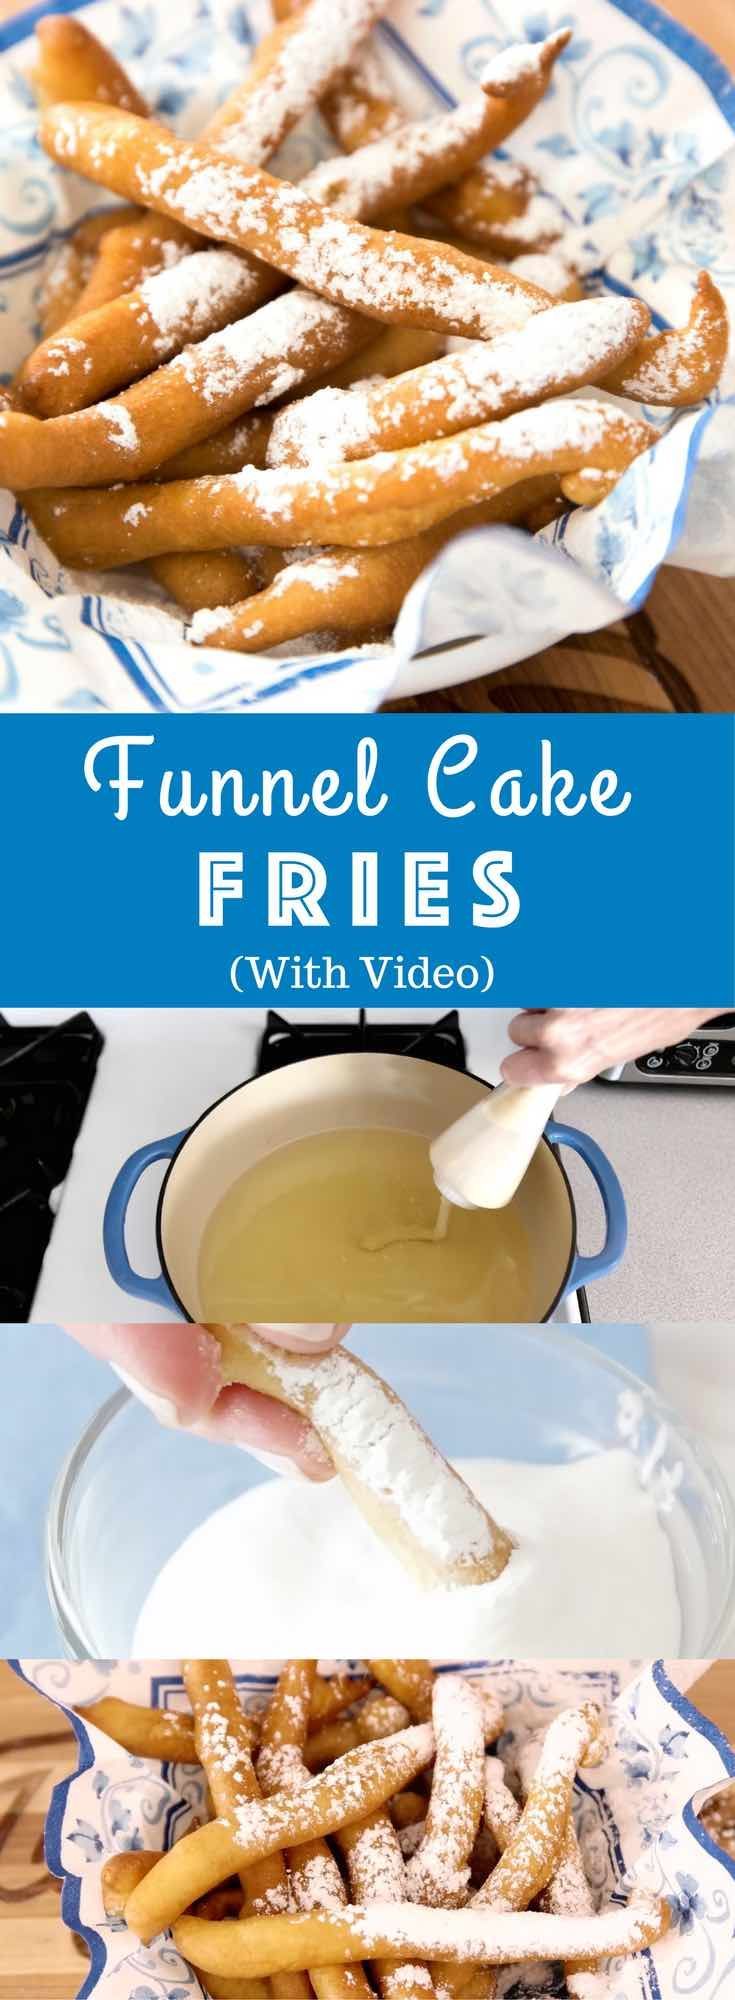 Easy Funnel Cake Fries – delicious cake batter is fried to perfect golden crispy fries. Served with some caramel sauce or a